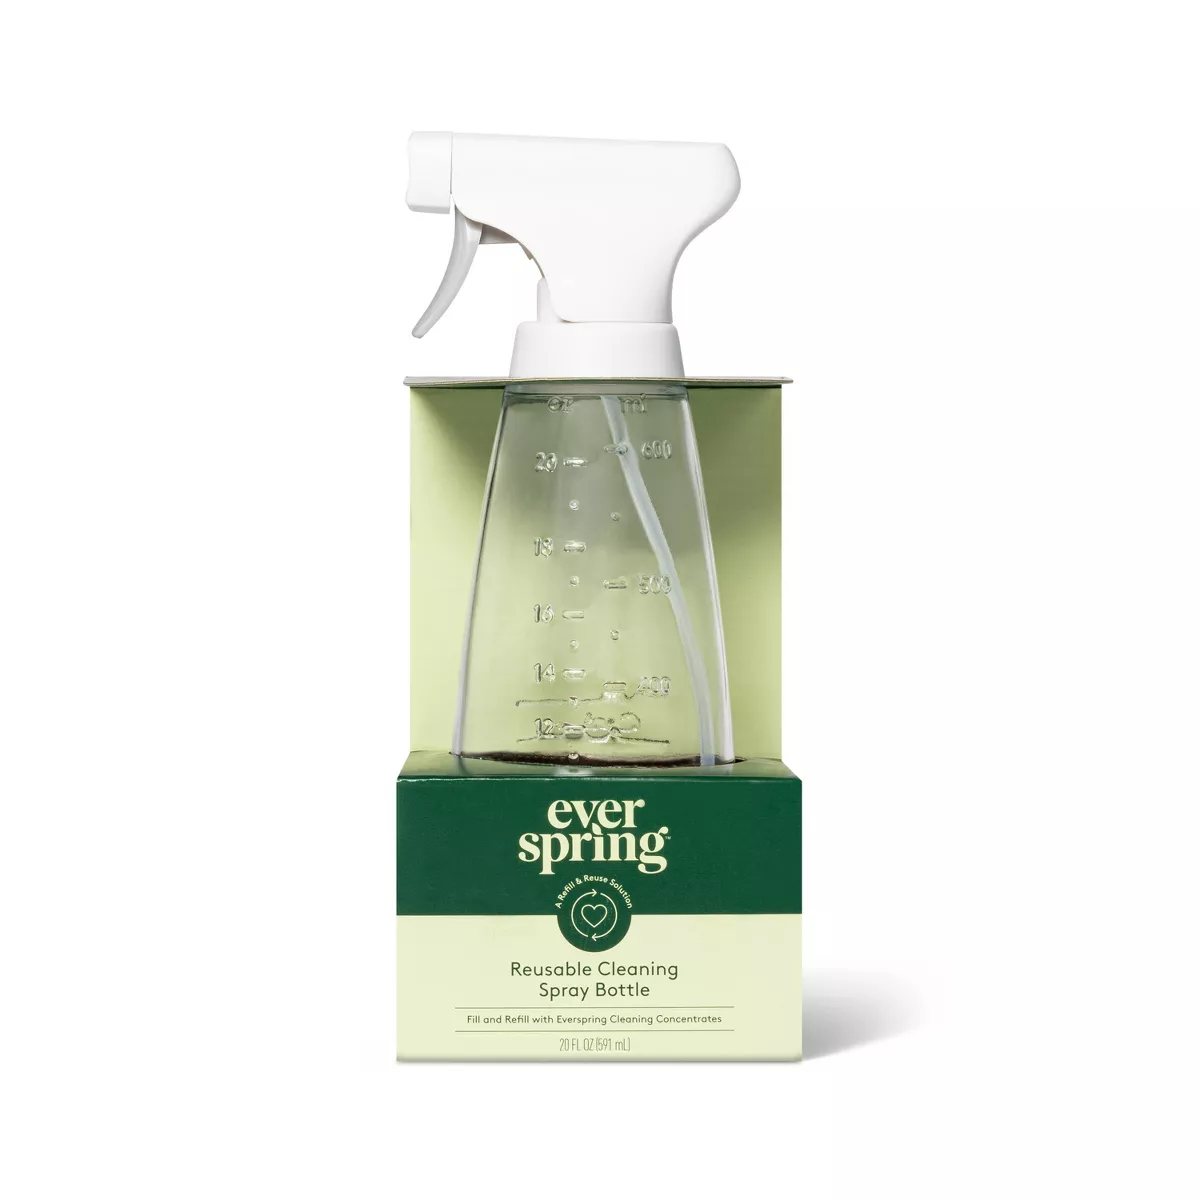 BPA-Free Glass Reusable Cleaning Spray Bottle for Eco-conscious Users.